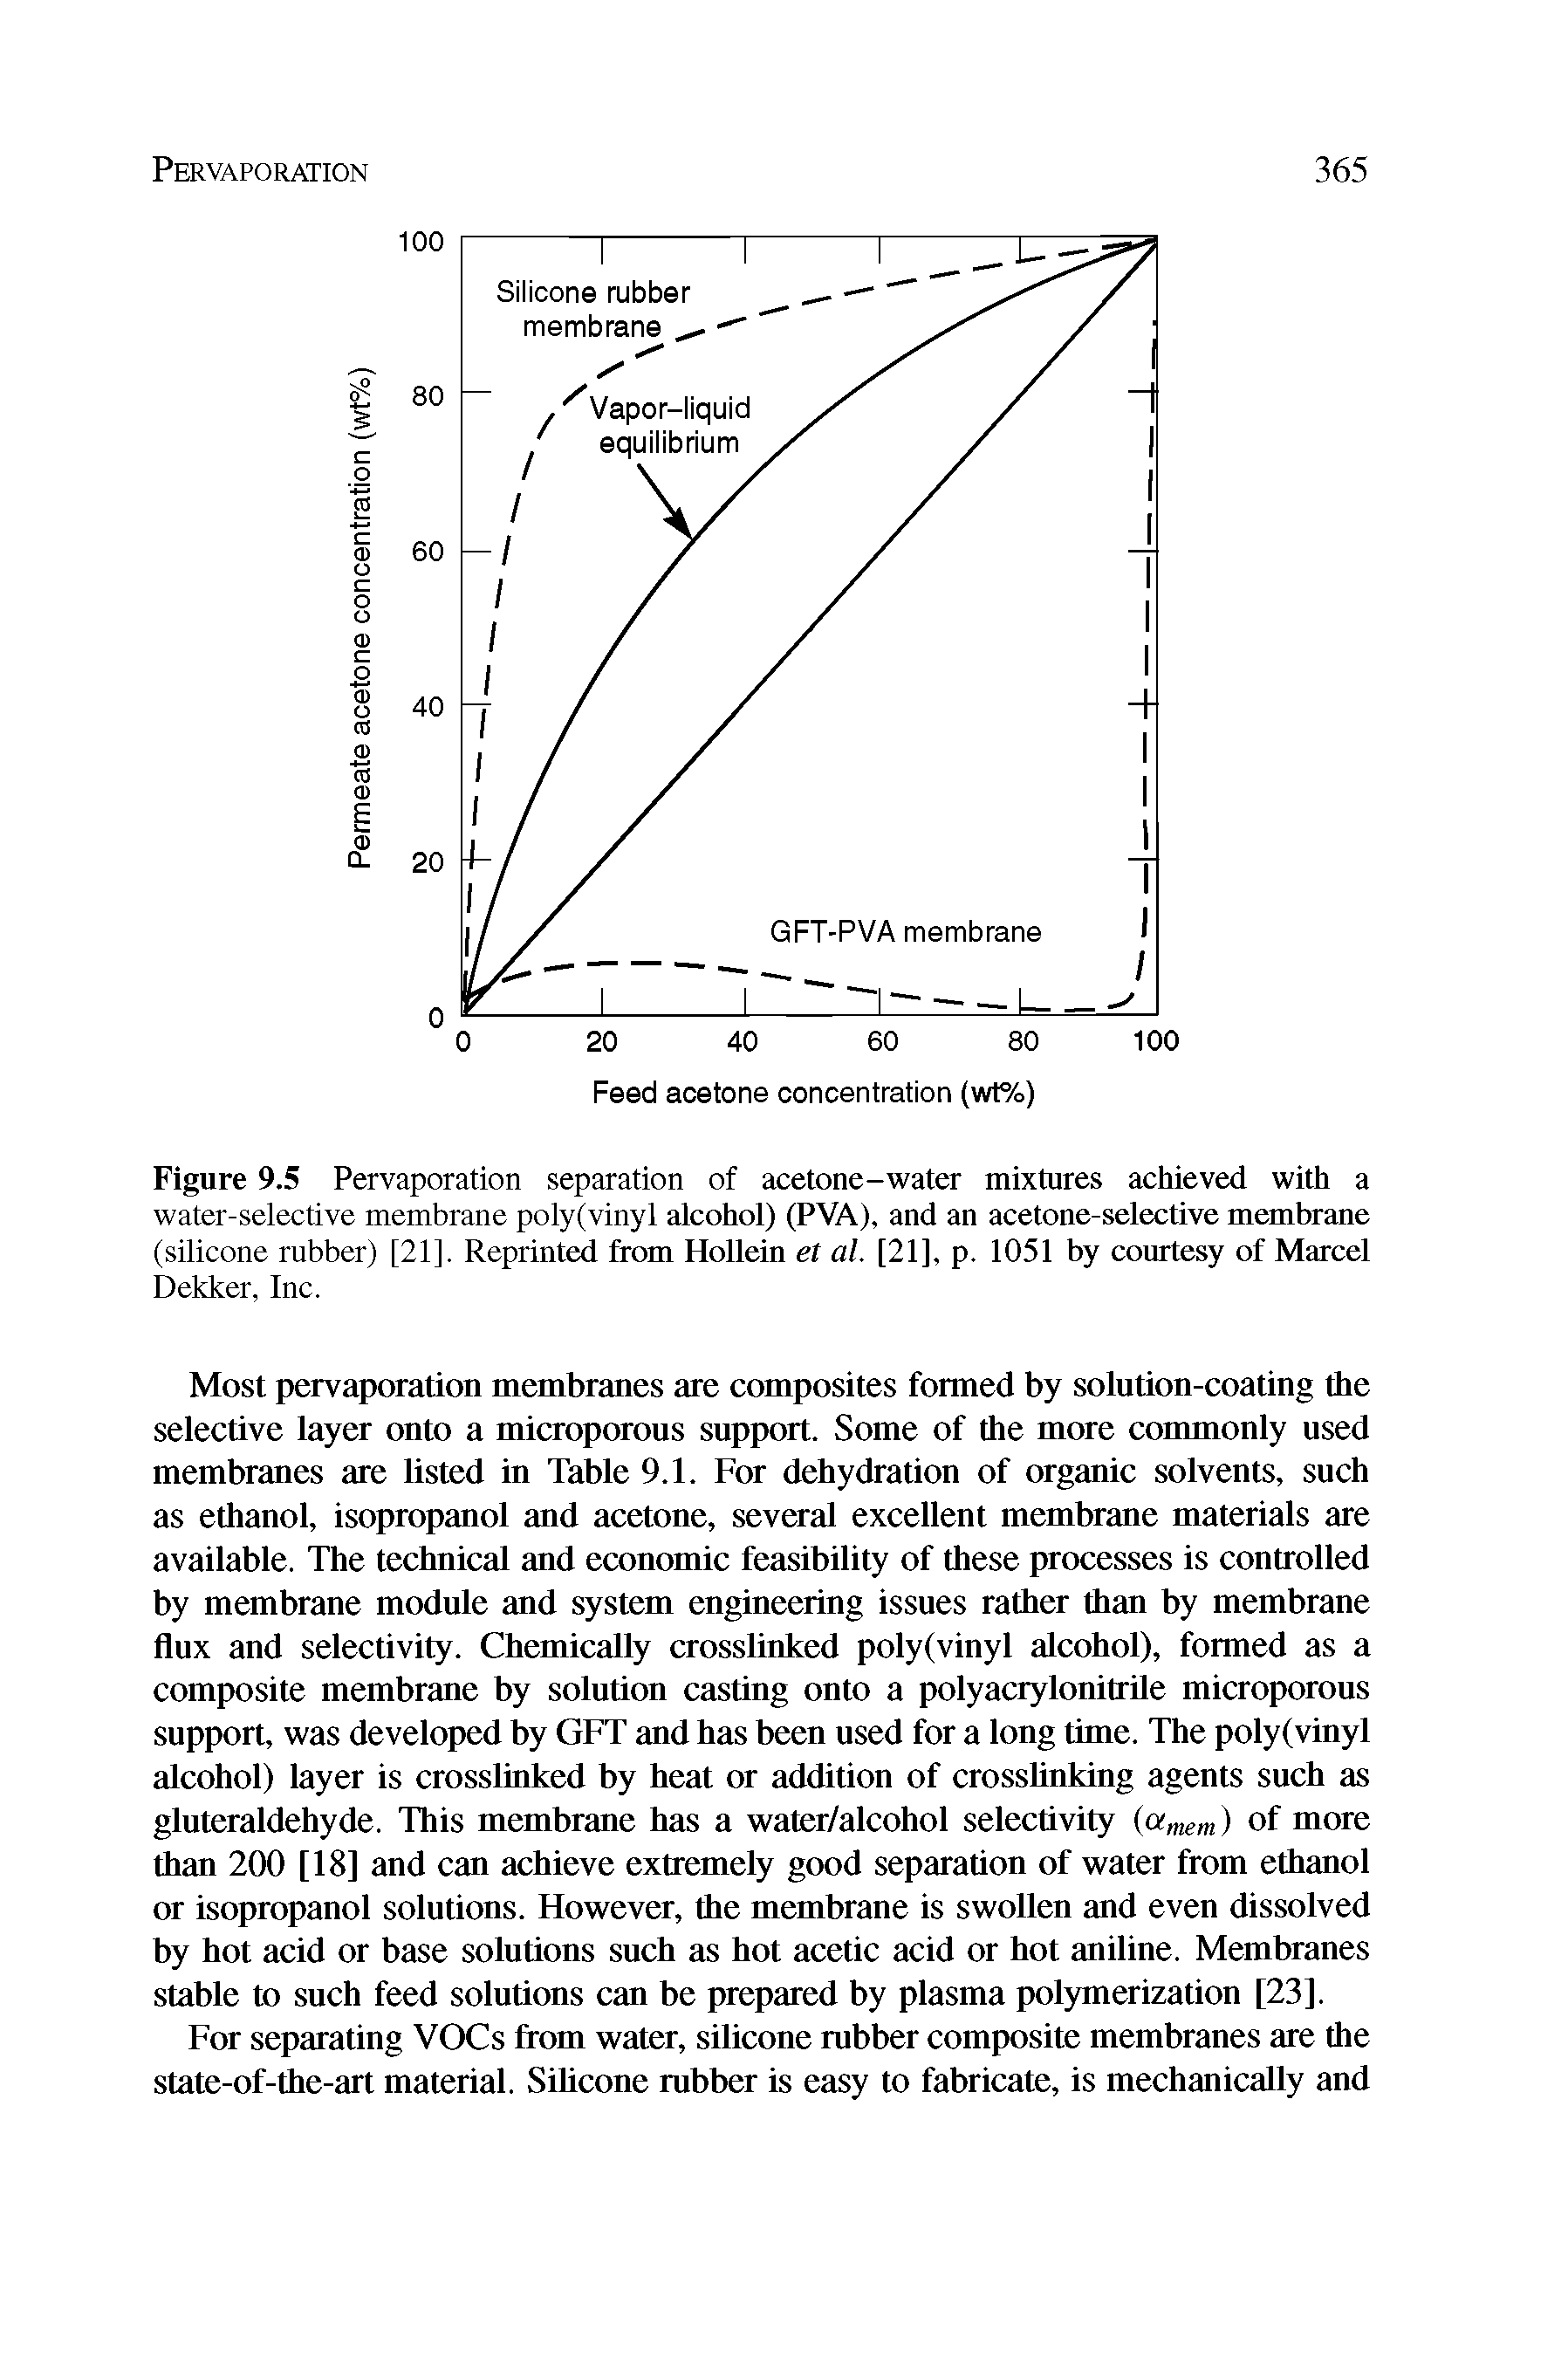 Figure 9.5 Pervaporation separation of acetone-water mixtures achieved with a water-selective membrane poly(vinyl alcohol) (PVA), and an acetone-selective membrane (silicone rubber) [21]. Reprinted from Hollein et al. [21], p. 1051 by courtesy of Marcel Dekker, Inc.